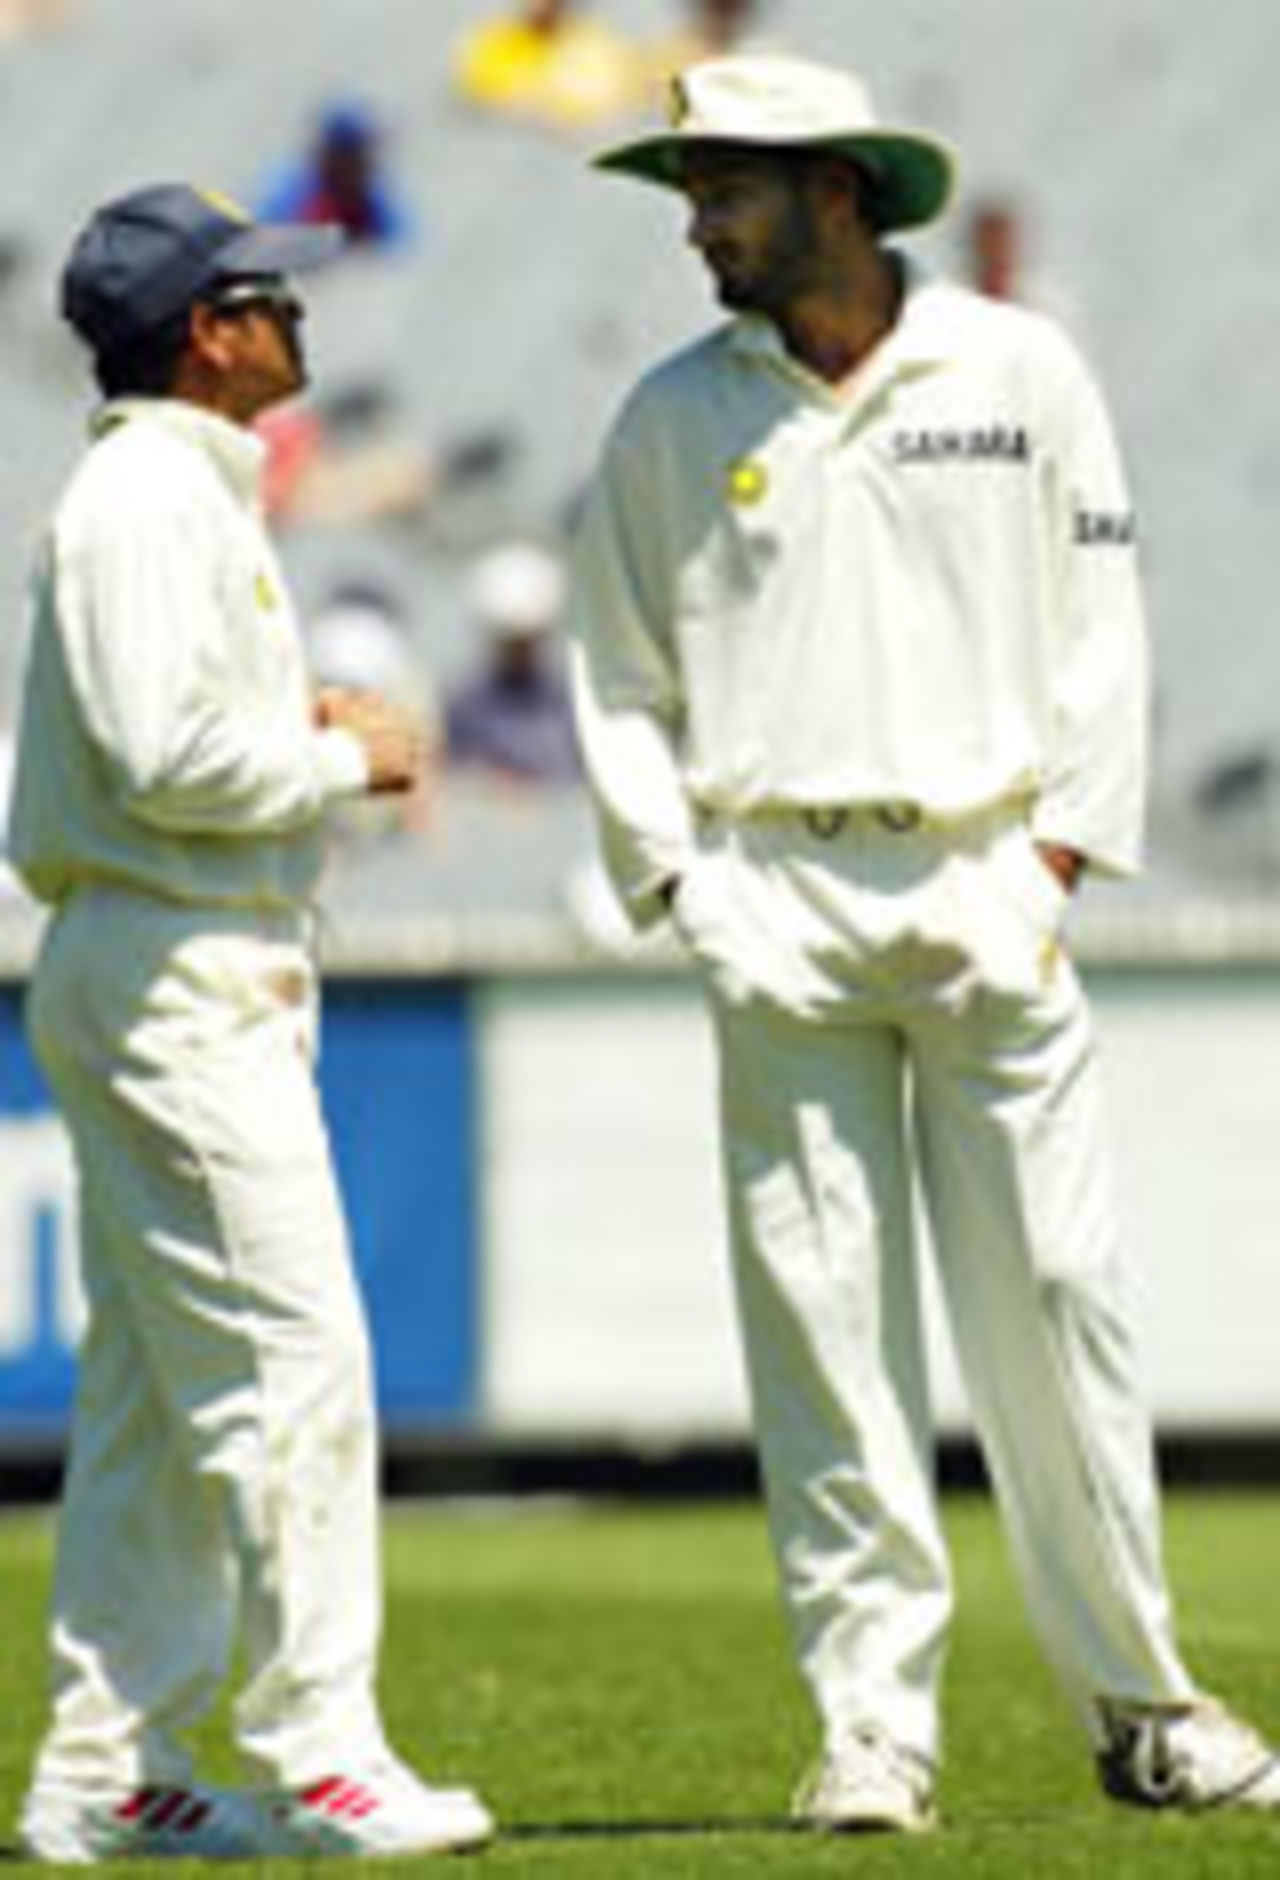 Sachin Tendulkar and Harbhajan Singh consulting as Victoria pile on the runs, Victoria v Indians, Tour match, Melbourne, 3rd day, November 27, 2003